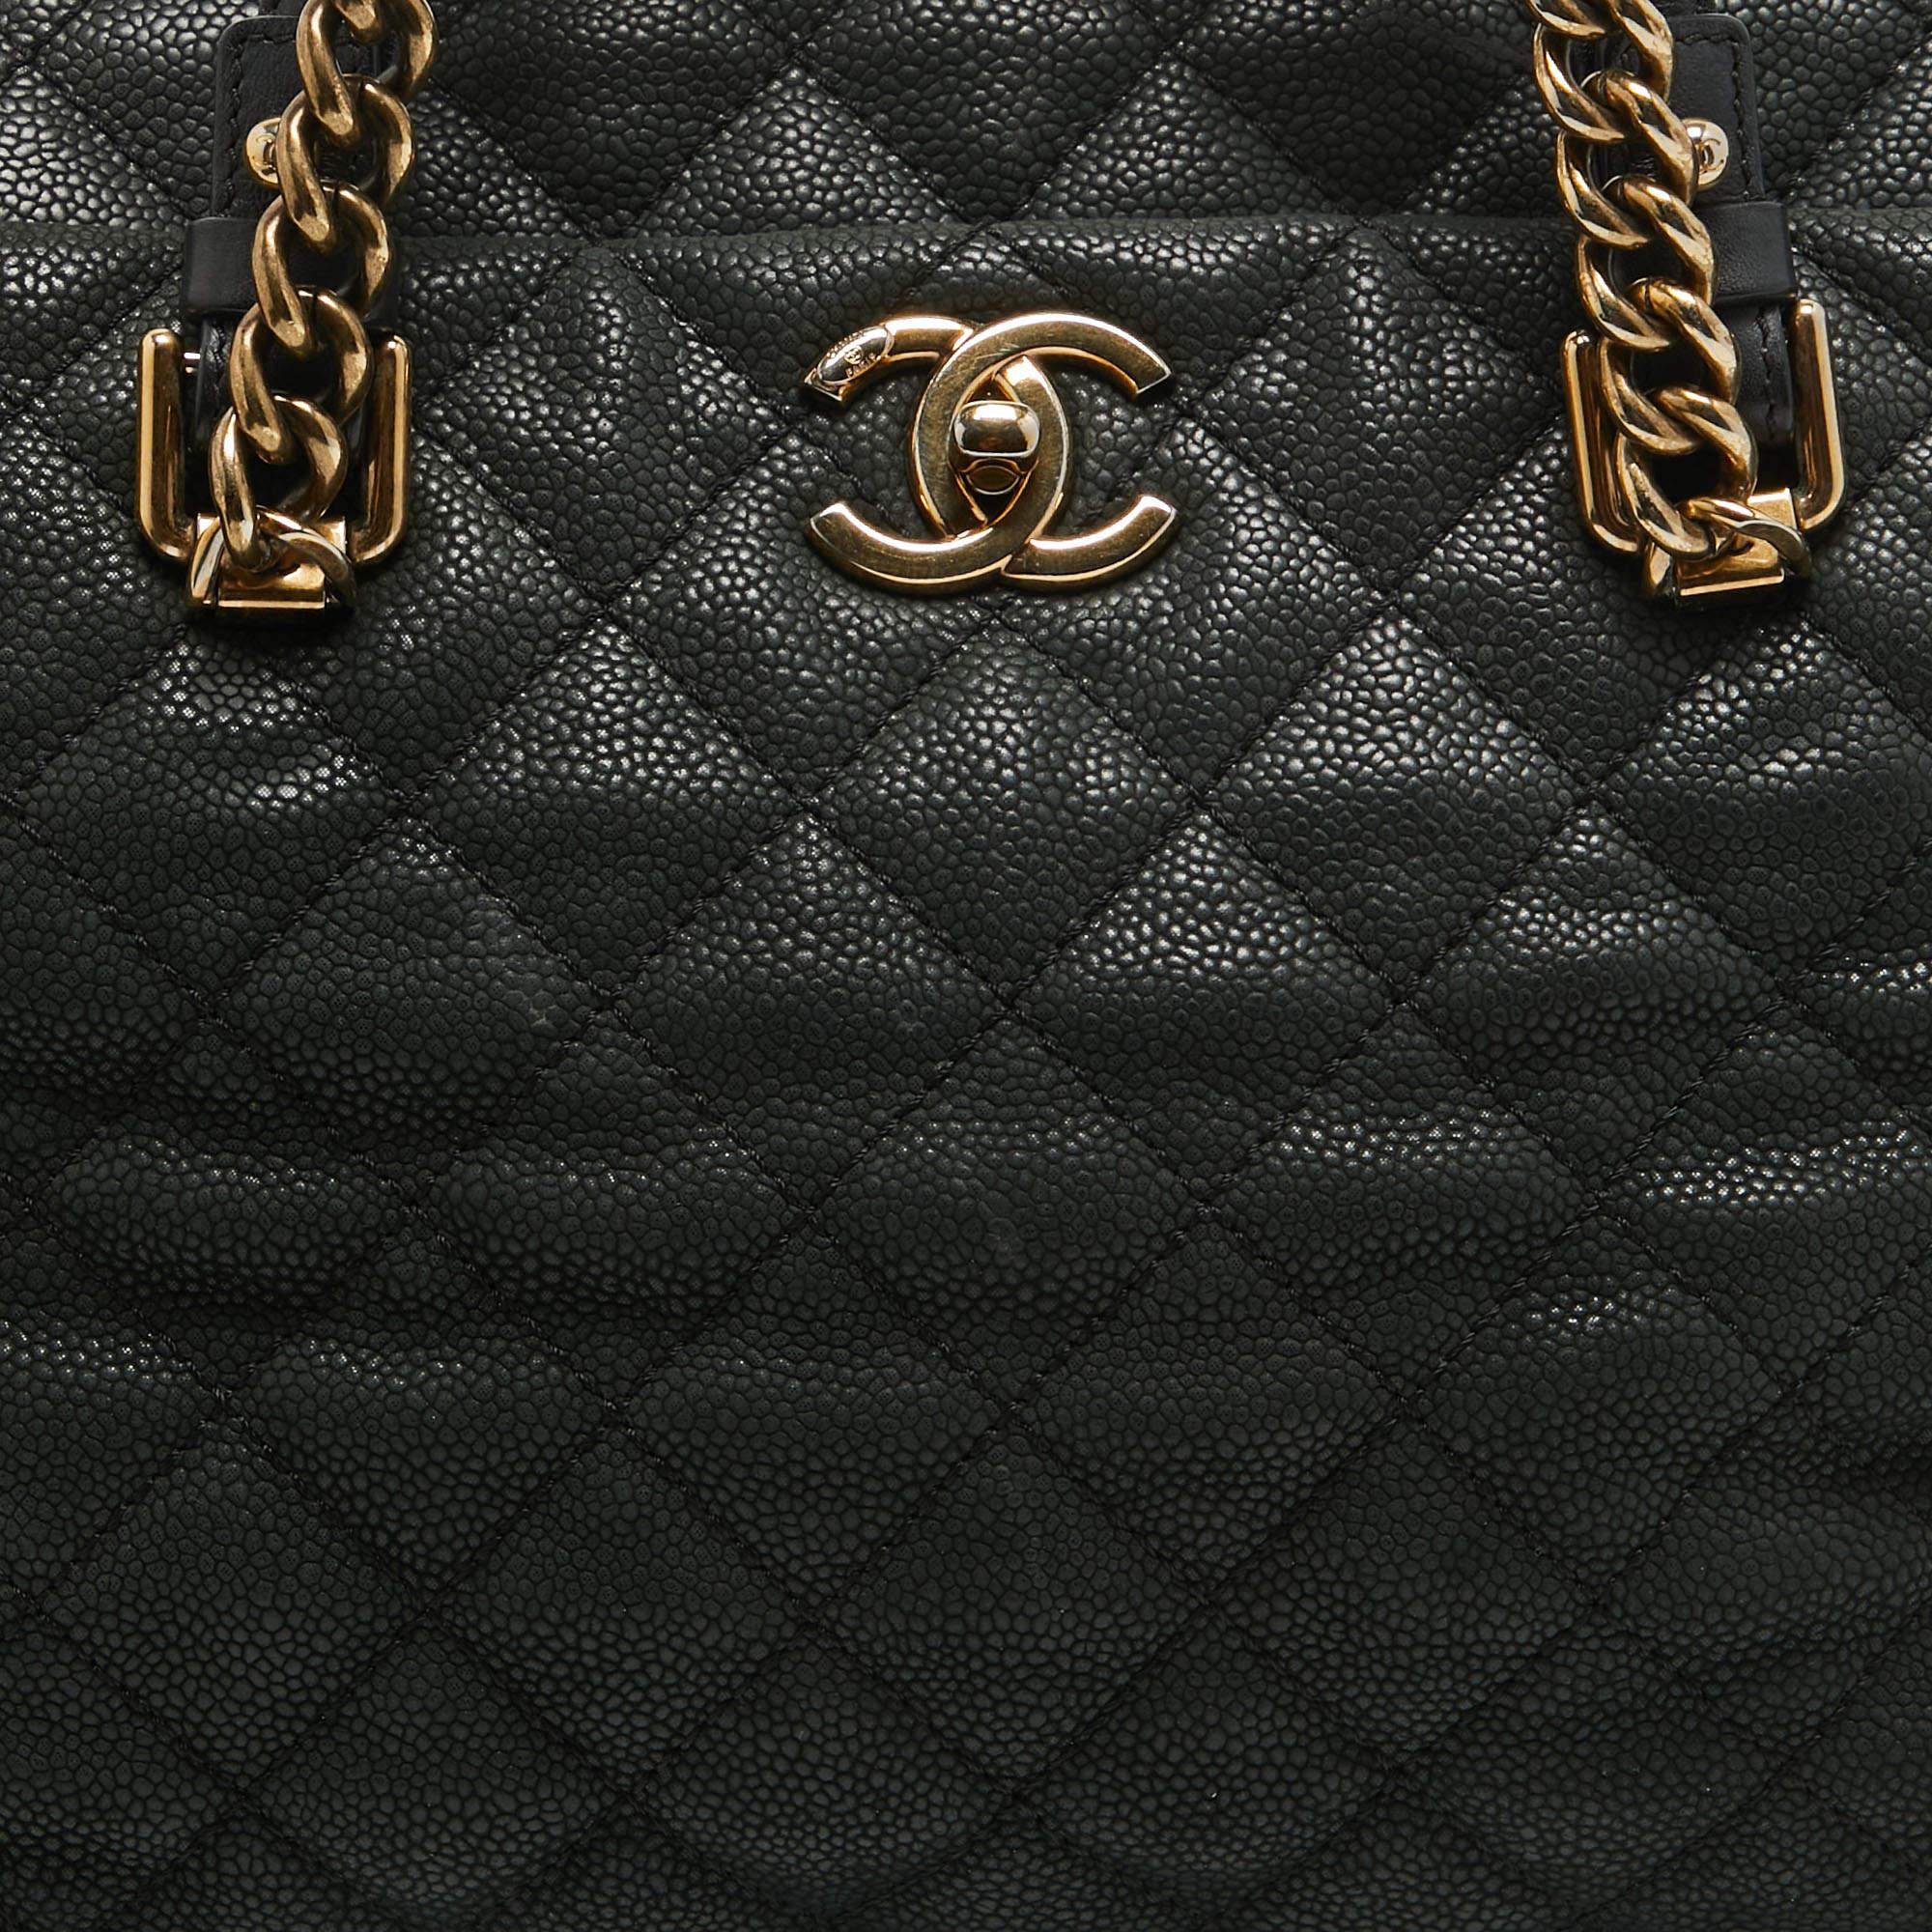 Chanel Black Caviar Leather Chic Quilt Tote 1